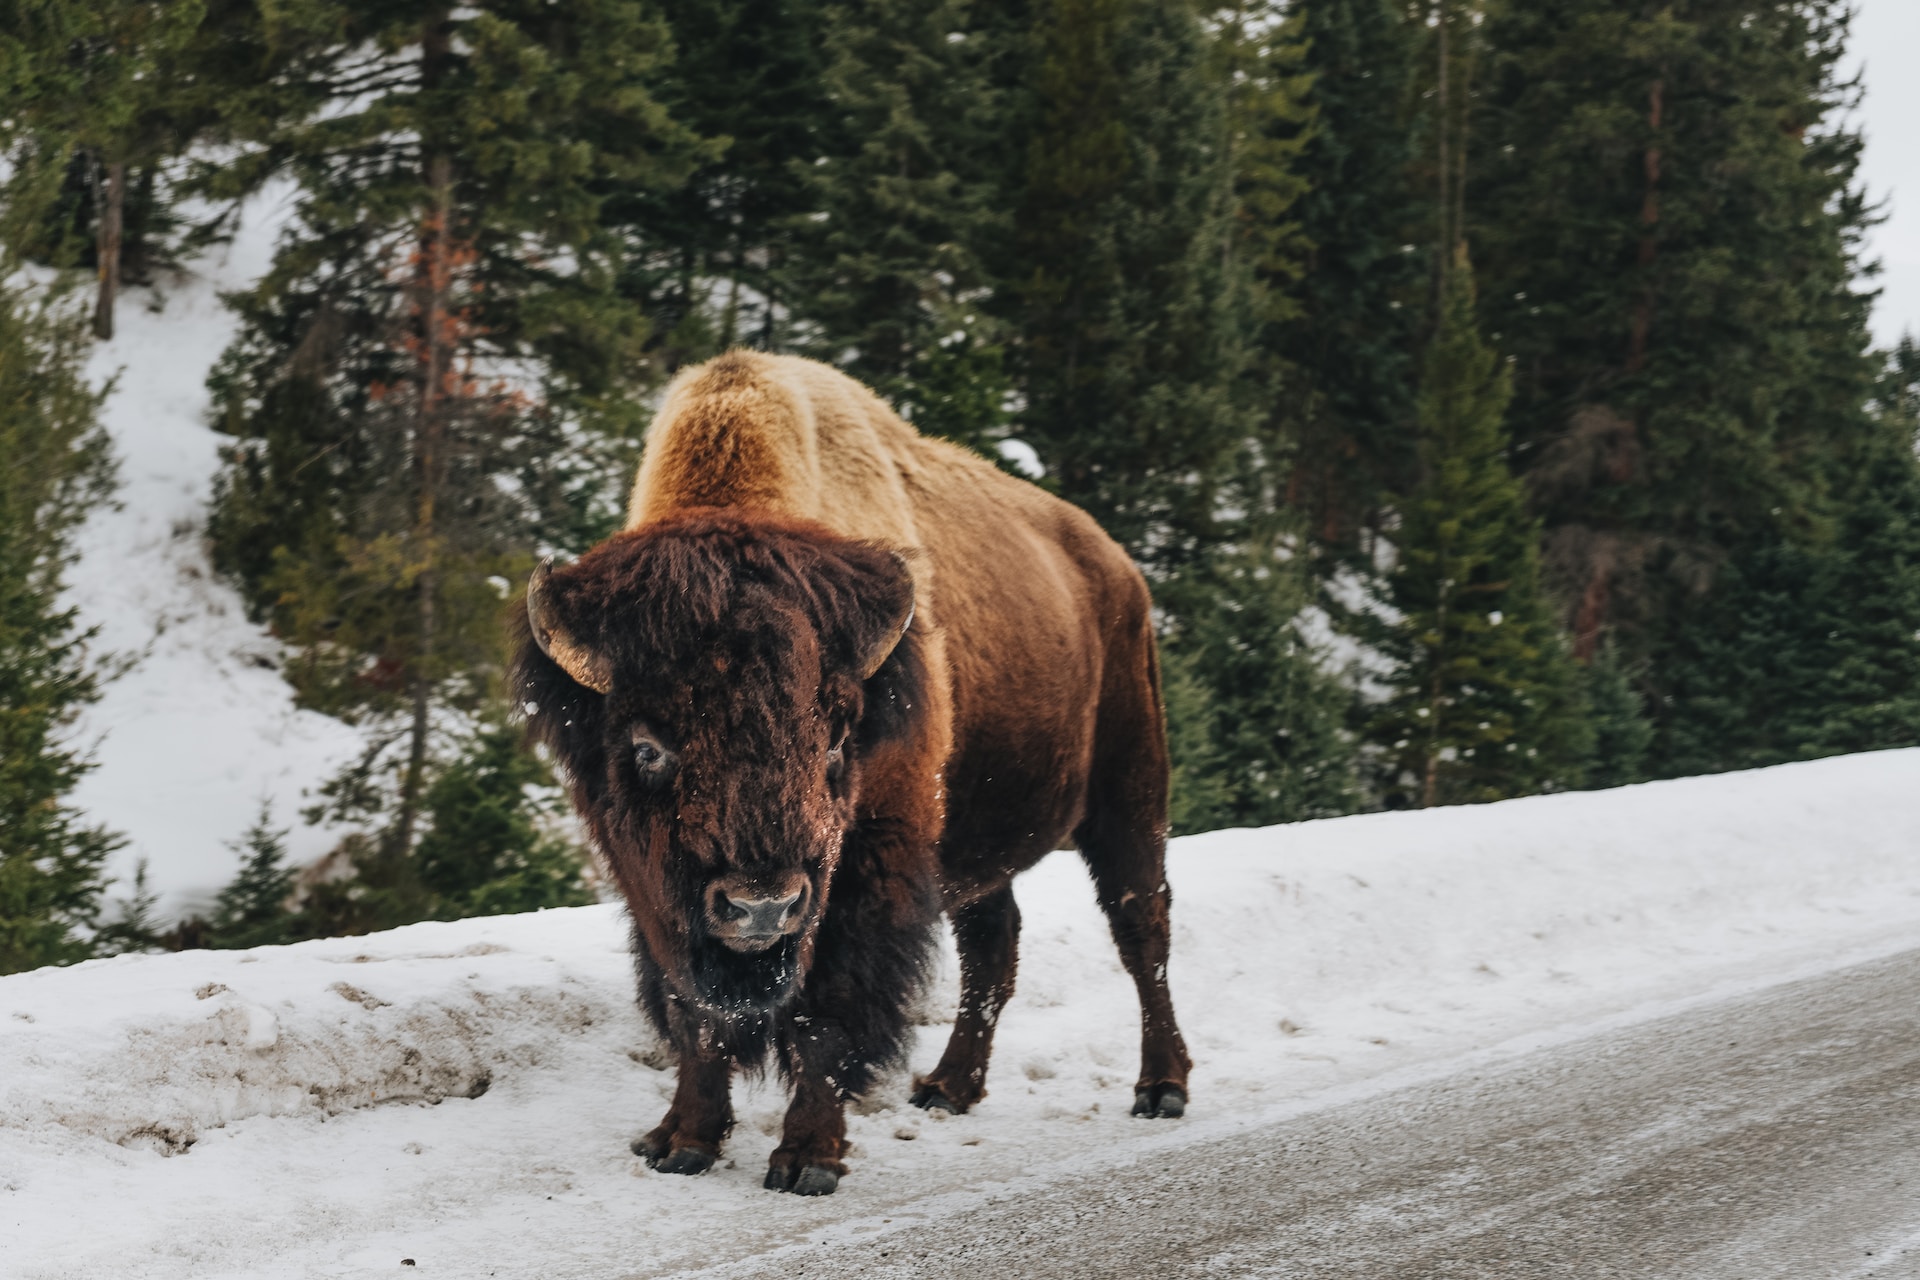 The repopulation of buffalo in Yellowstone National Park is a sustainable travel success story. (photo: Tevin Trinh)